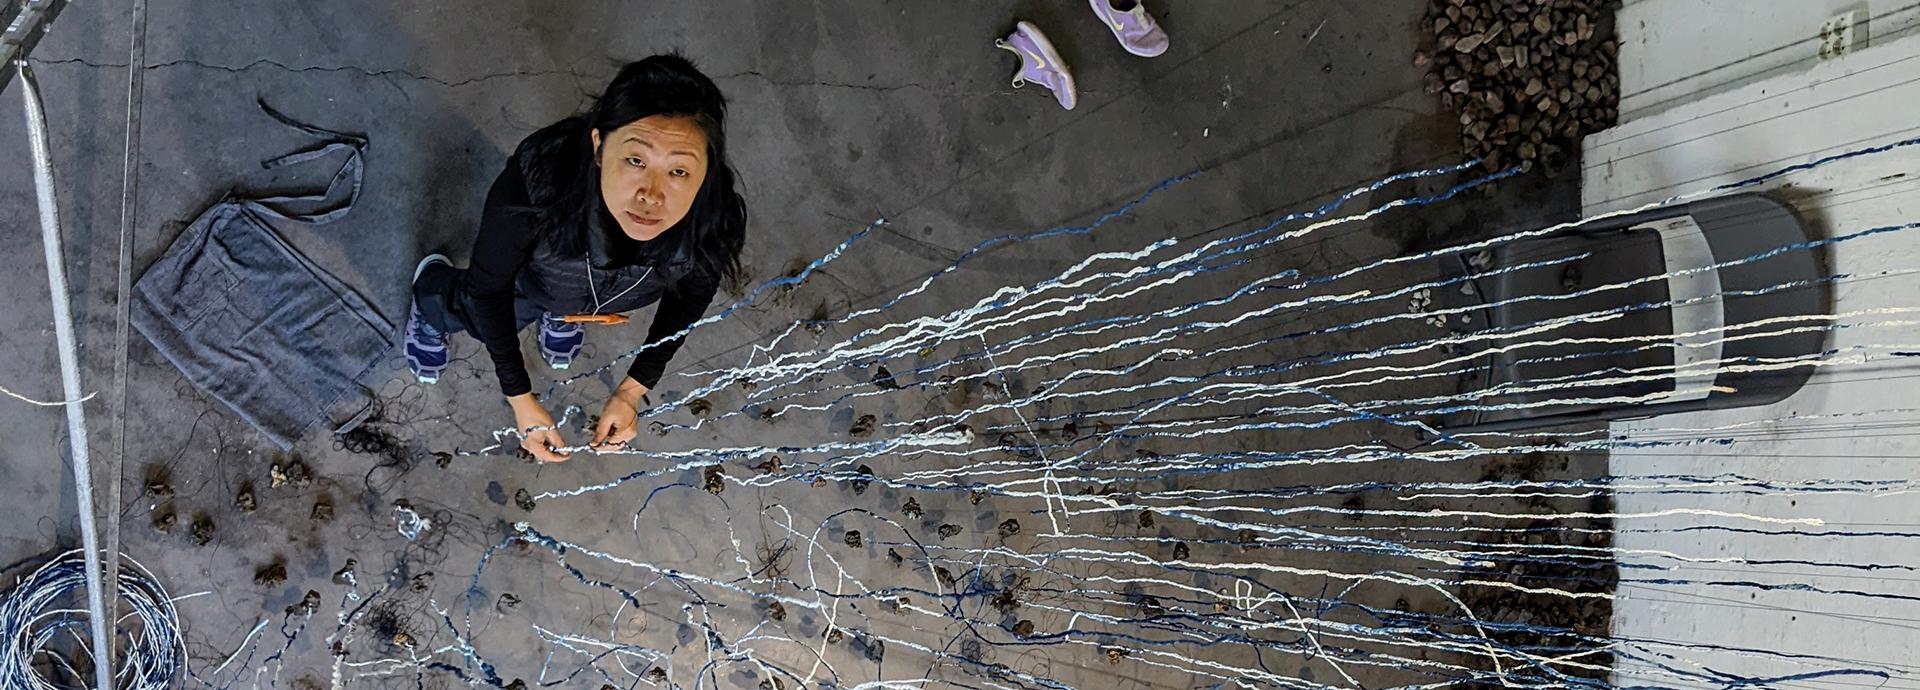 Beili Liu photographed from above while she is working on her art installation, Still Winds.